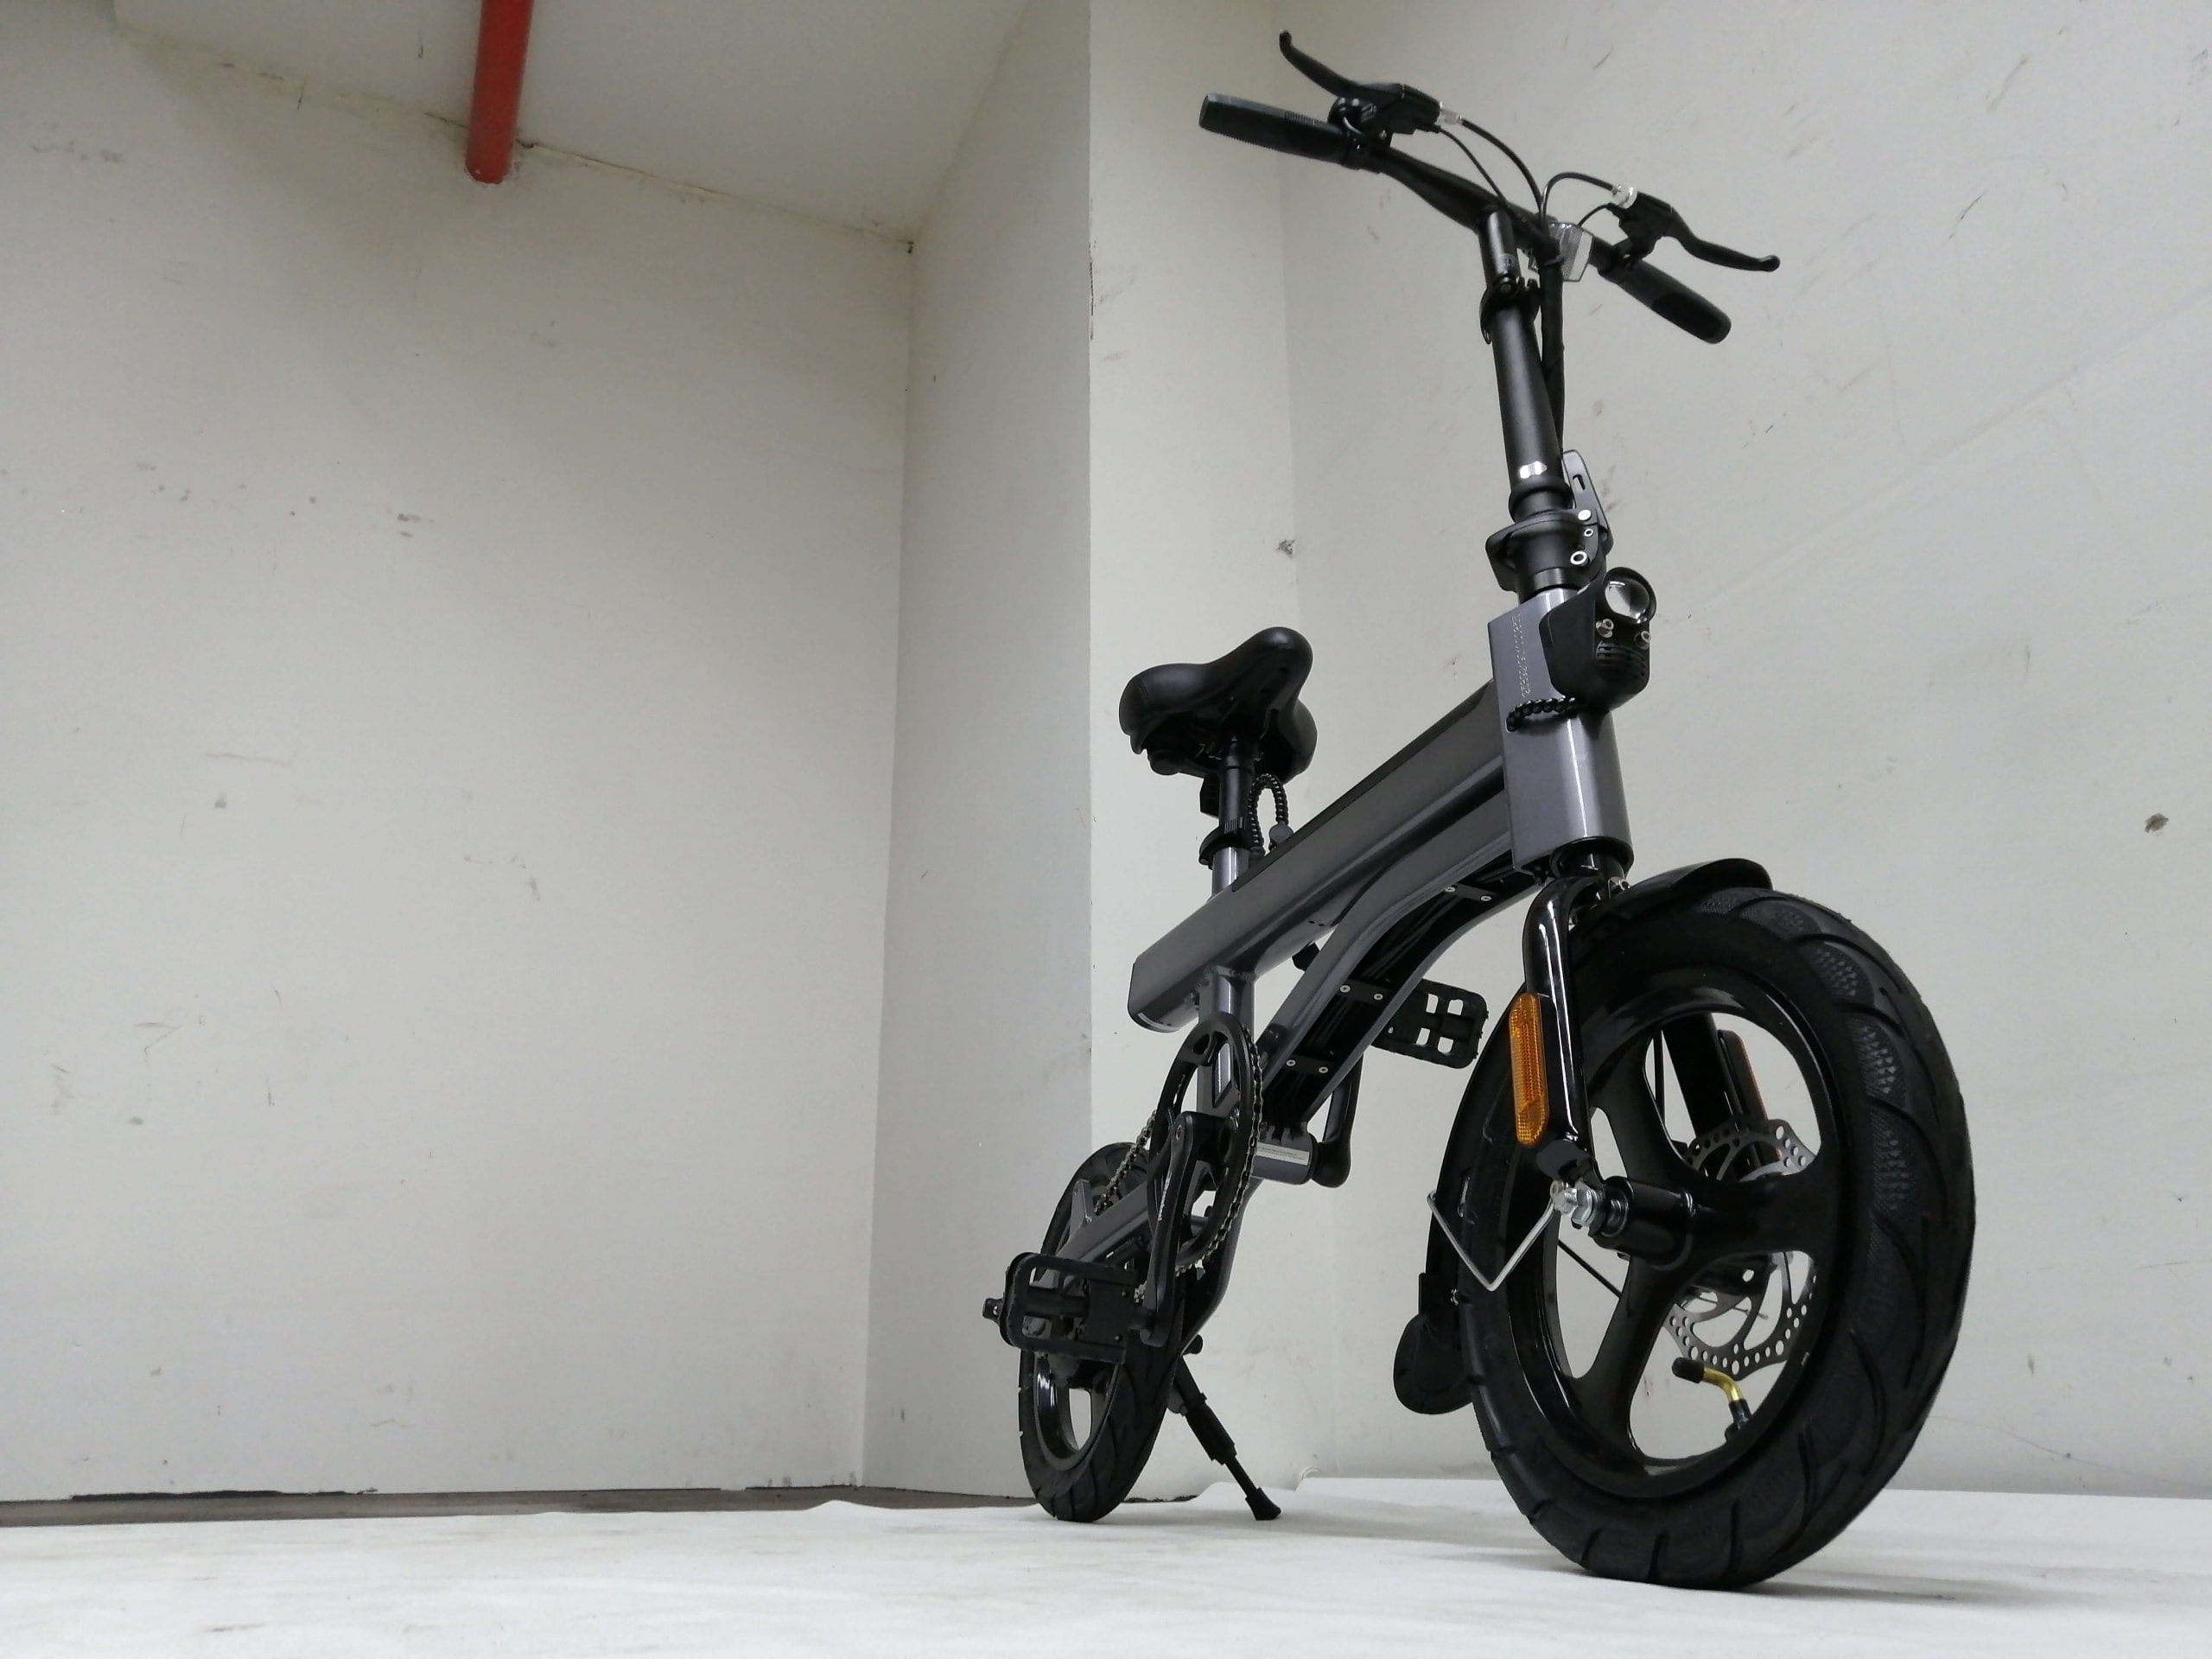 JI MOVE LTA approved ebike closing banner scaled - Review of JI-MOVE LC, the most compact LTA approved ebike?